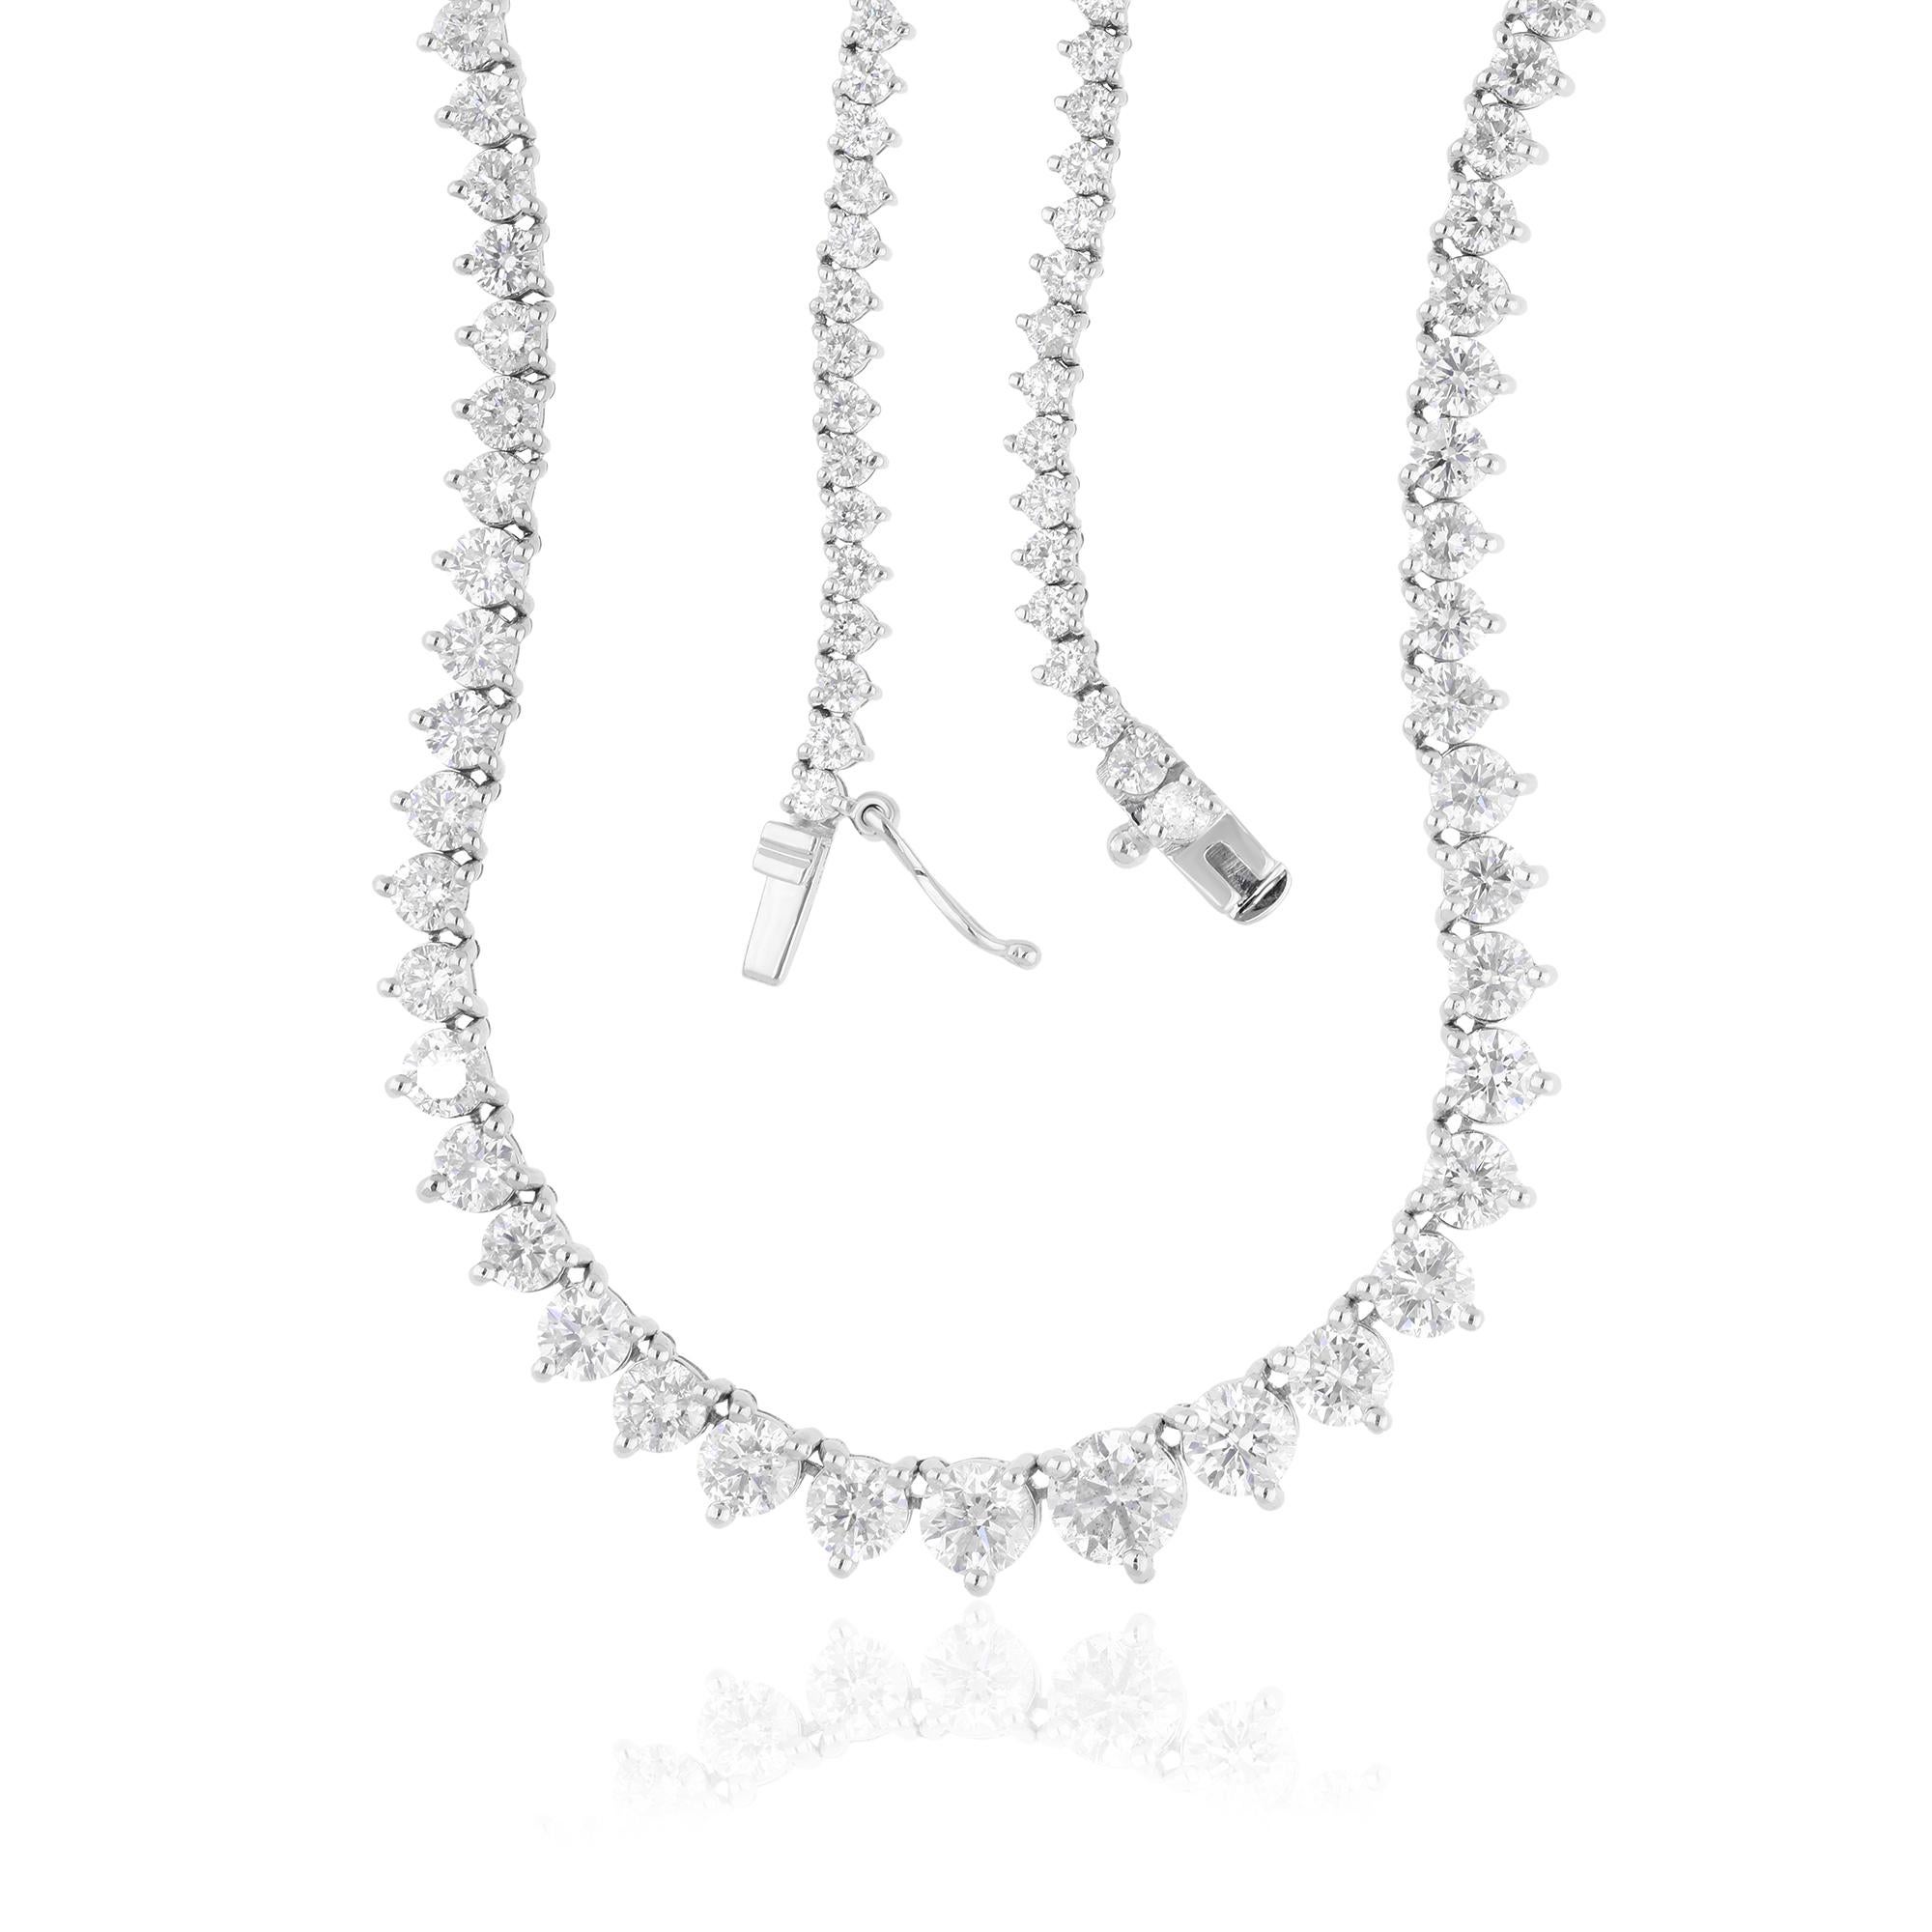 Immerse yourself in the sheer opulence of this handmade 10.50 carat diamond necklace, a masterpiece of fine jewelry crafted in 14 karat white gold. Every facet of this necklace exudes luxury and sophistication, from the dazzling array of natural